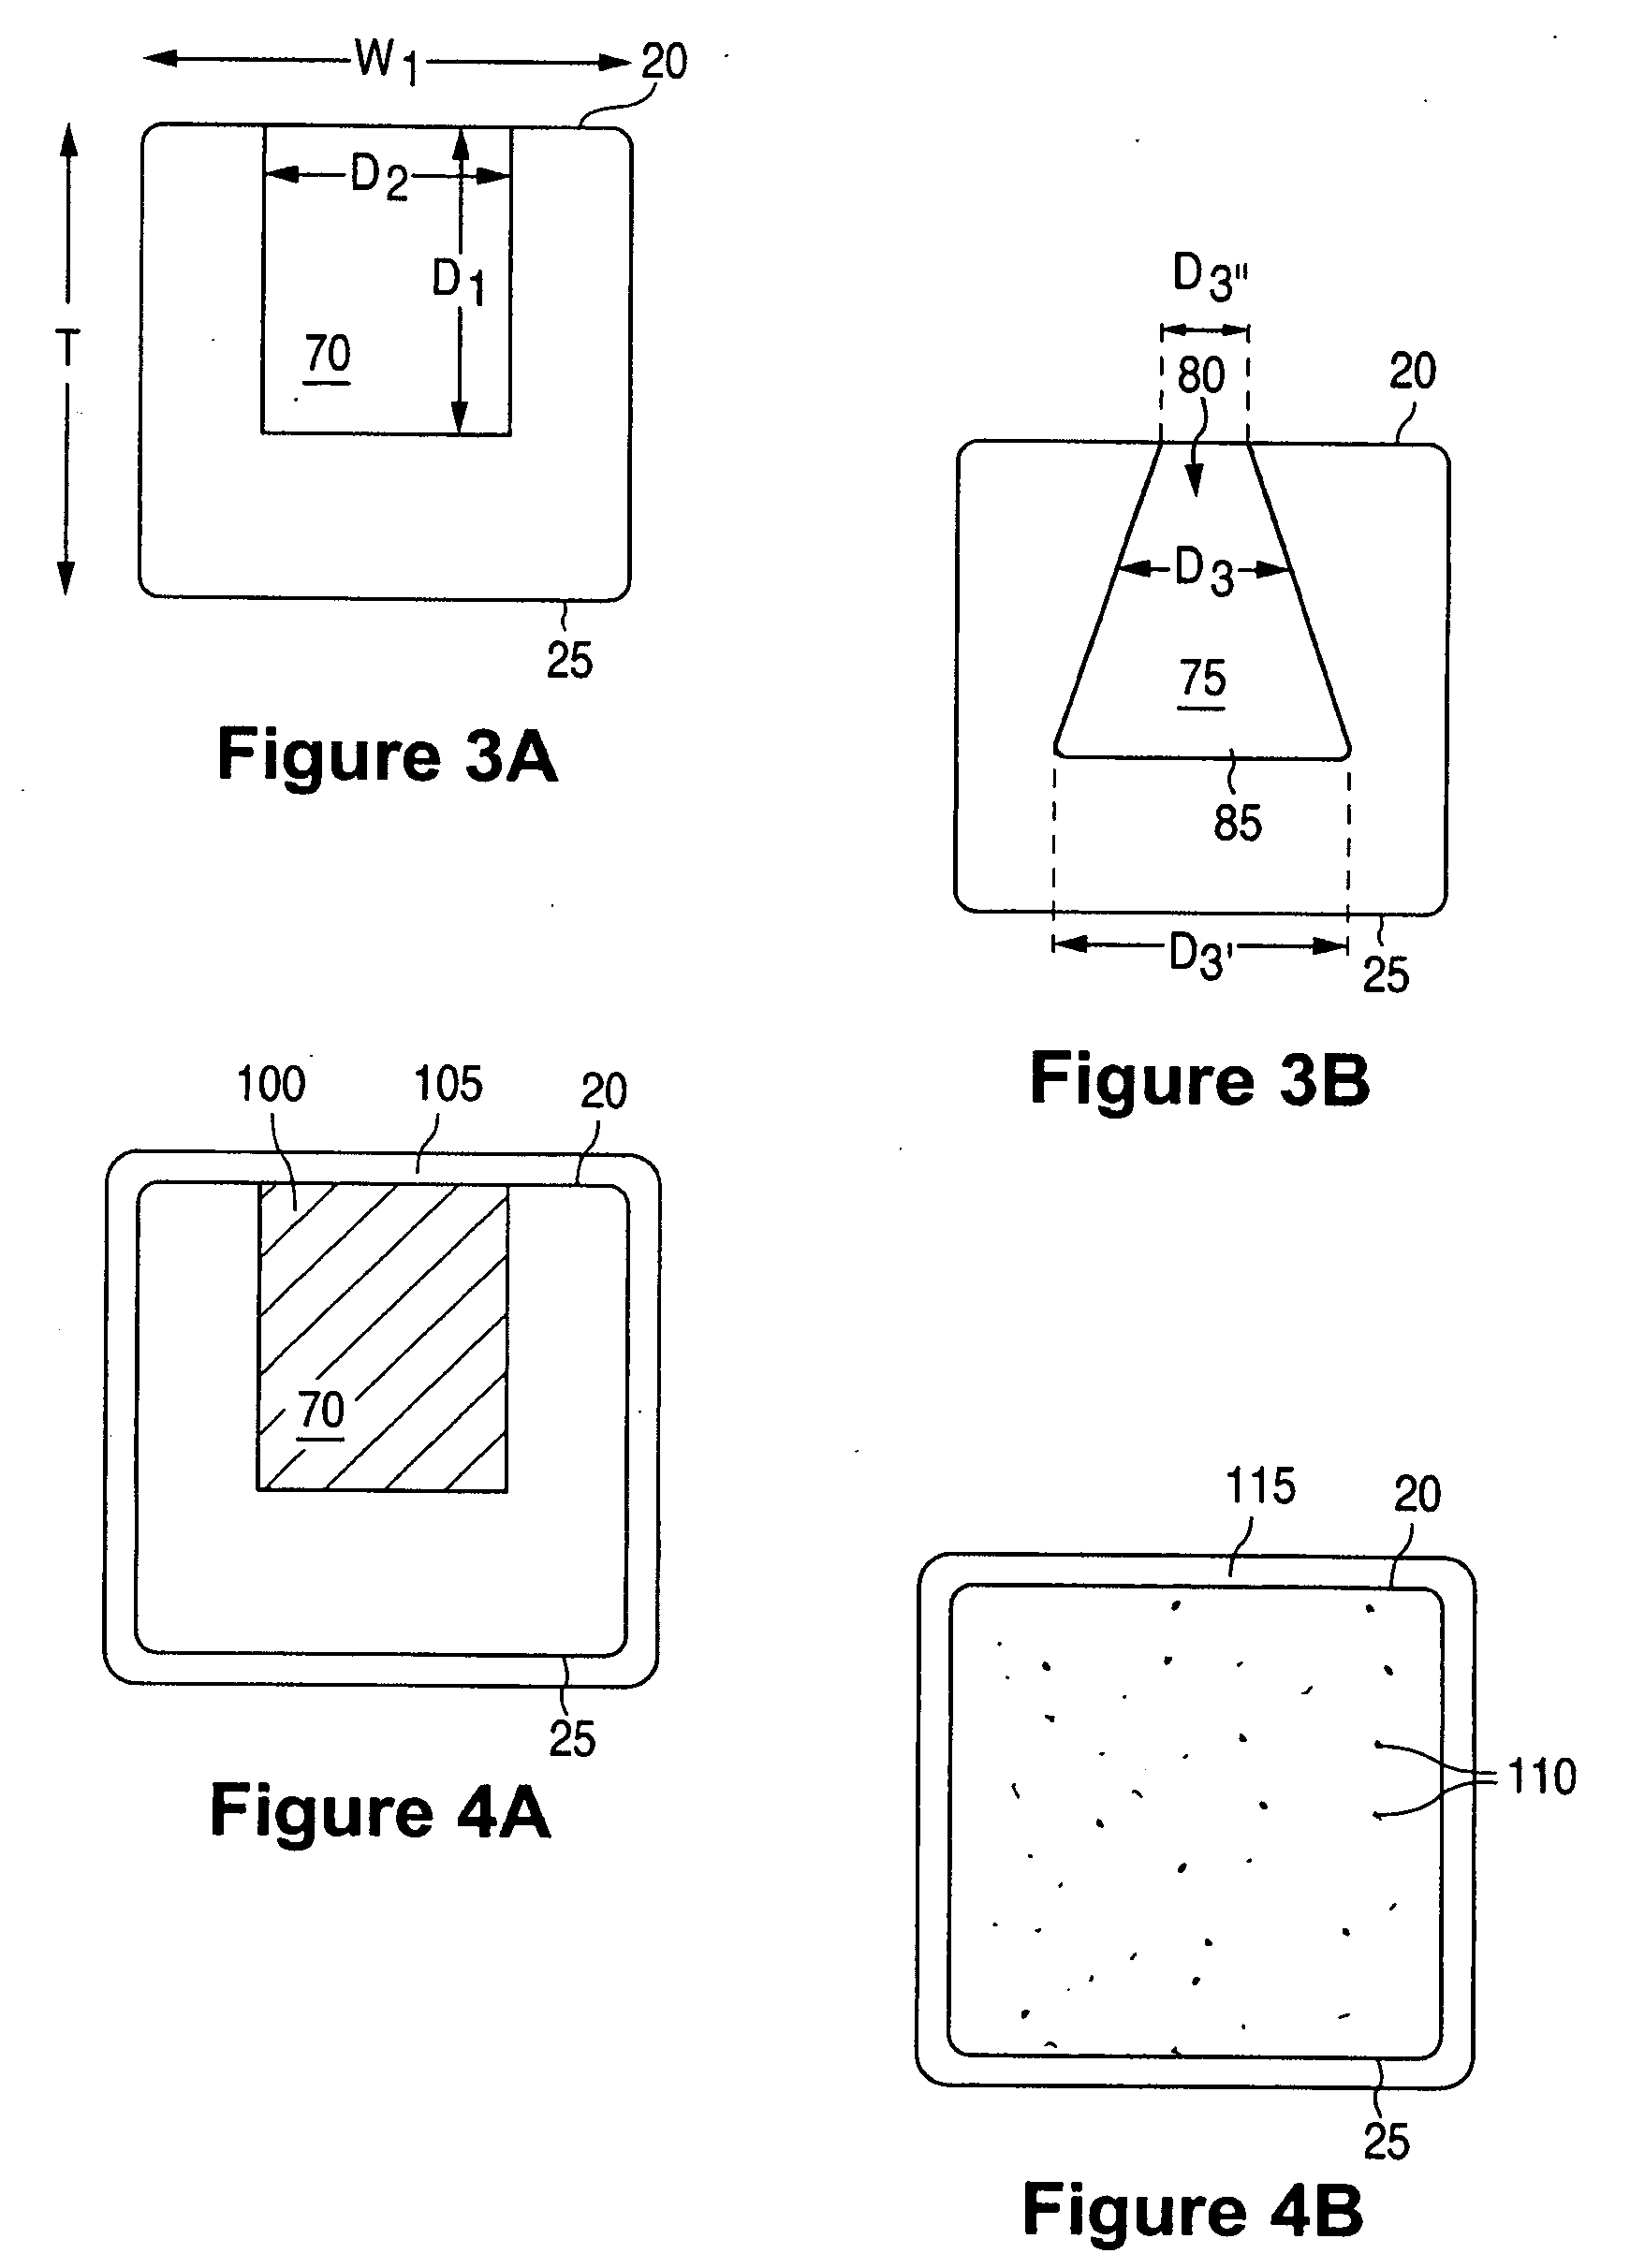 Anti-Proliferative and Anti-Inflammatory Agent Combination for Treatment of Vascular Disorders with an Implantable Medical Device